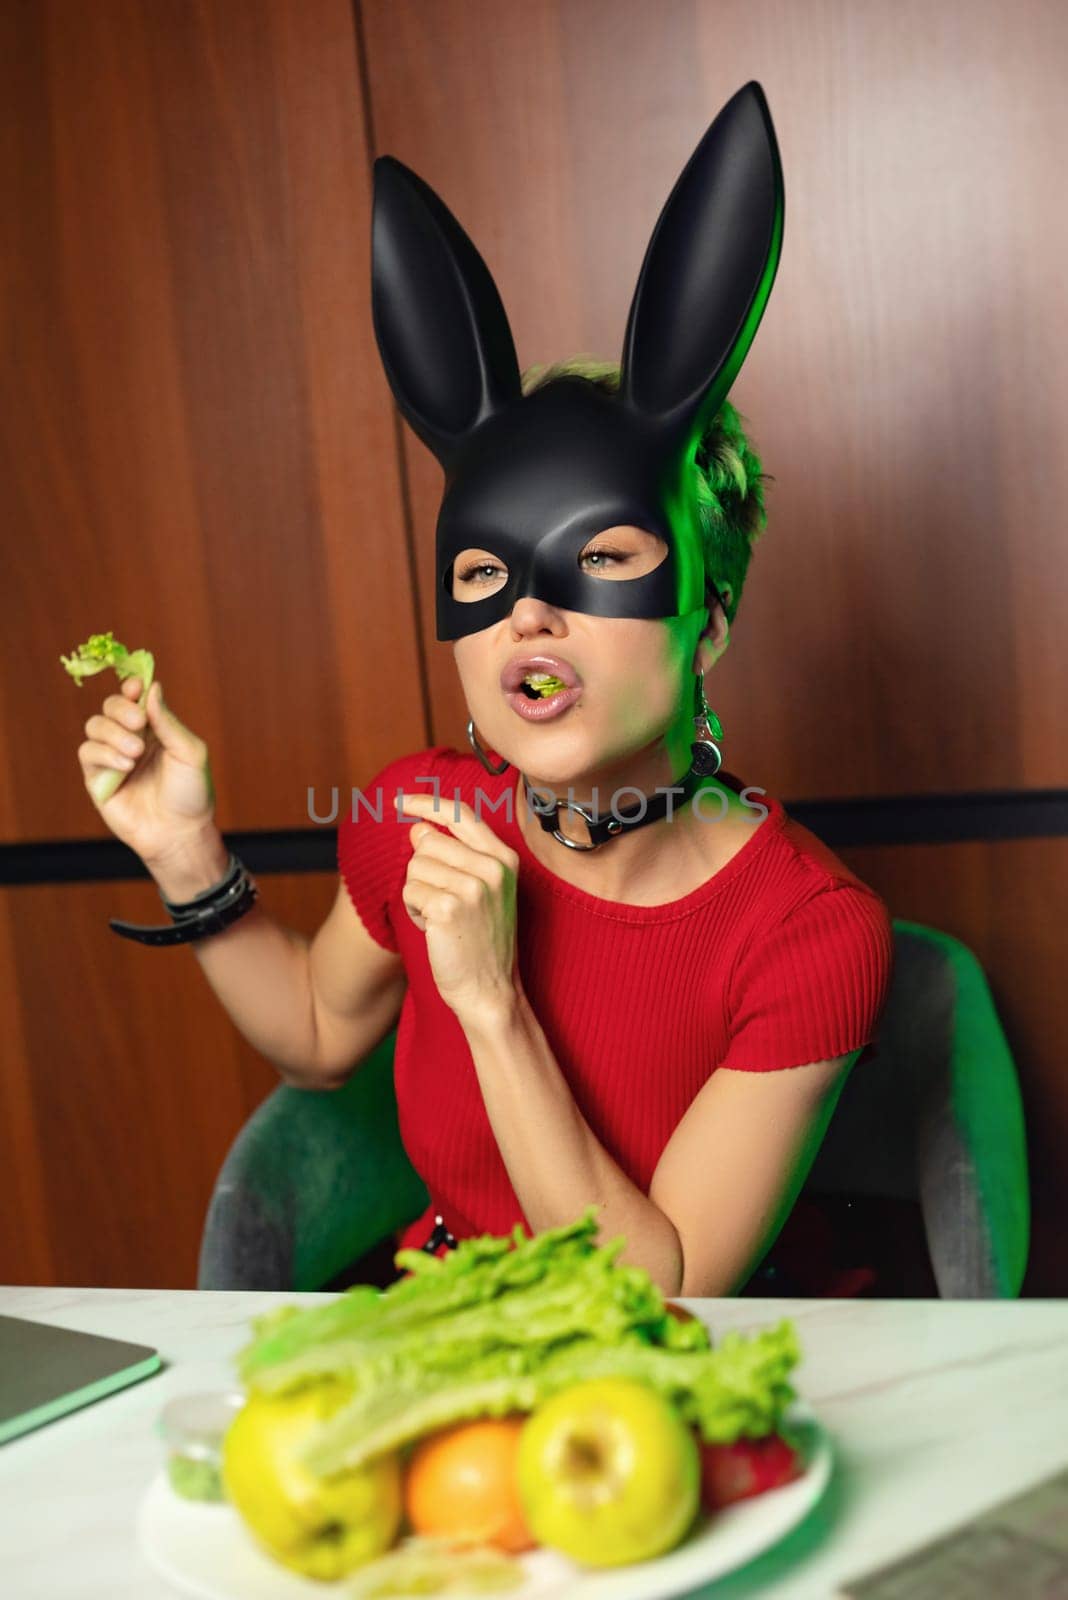 A beautiful girl in a bdsm rabbit mask and a bright red dress eats lettuce leaves promoting a healthy lifestyle and vegetarianism